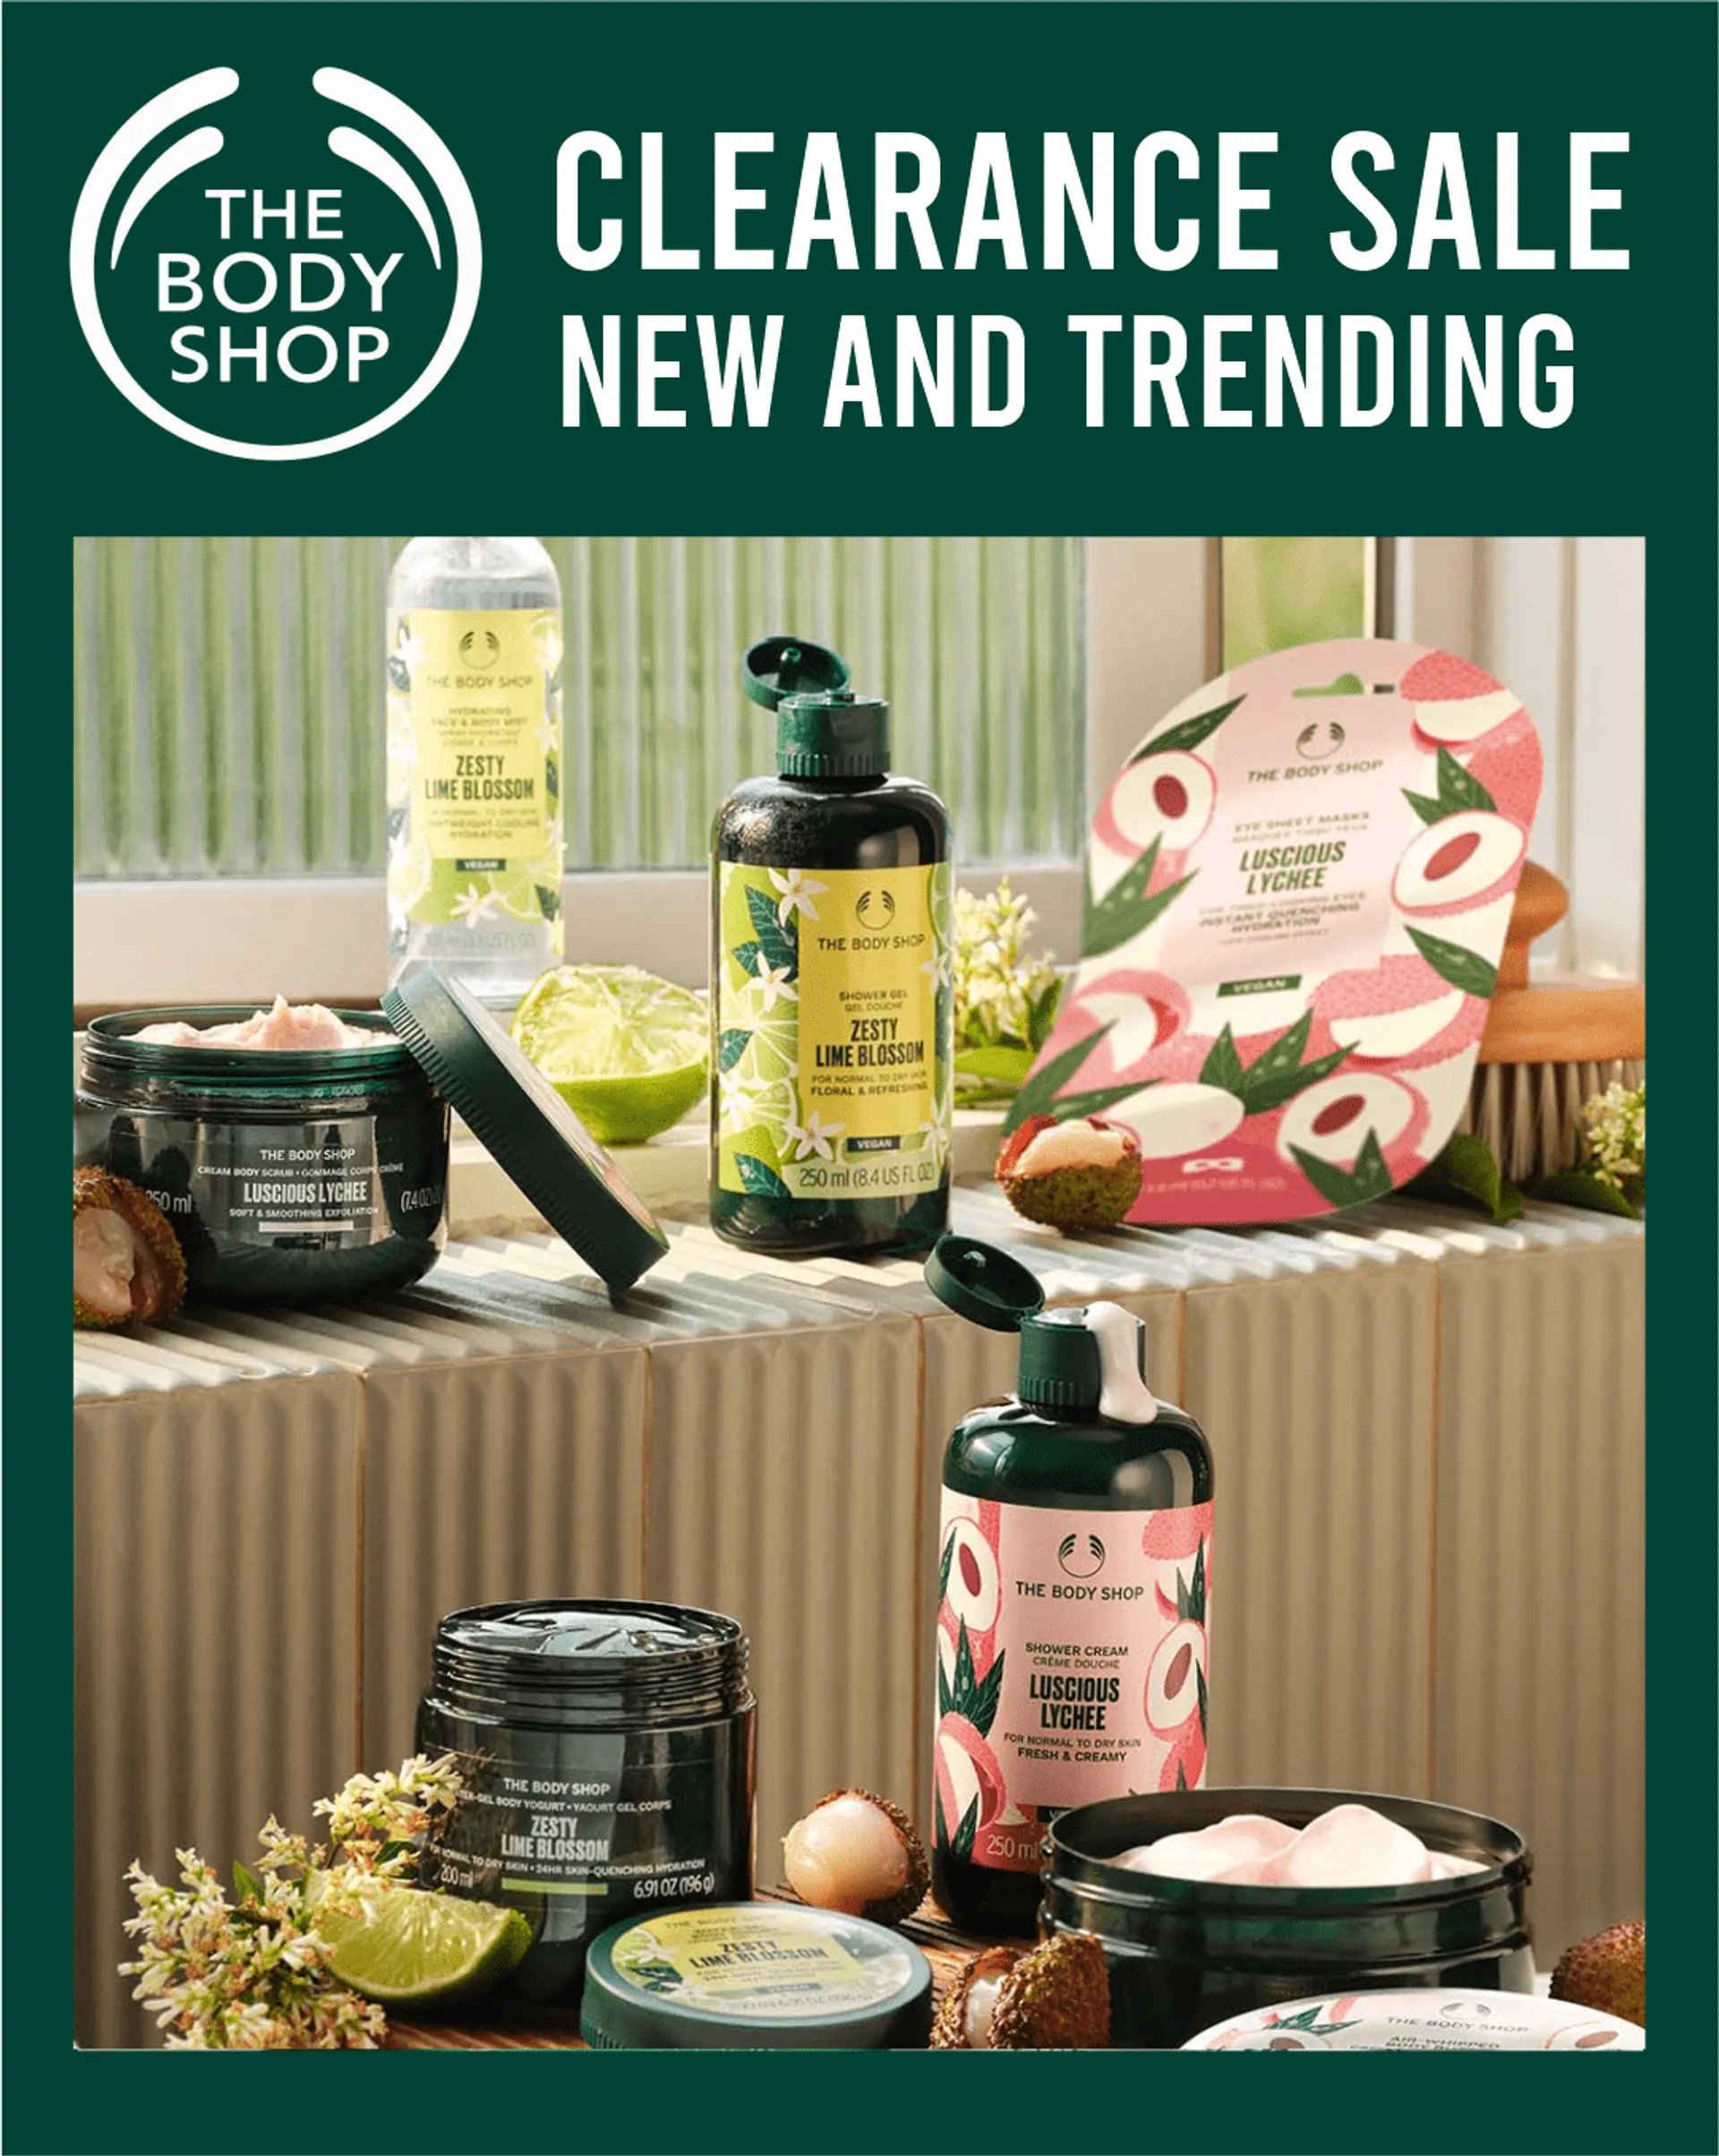 The Body Shop - New and trending